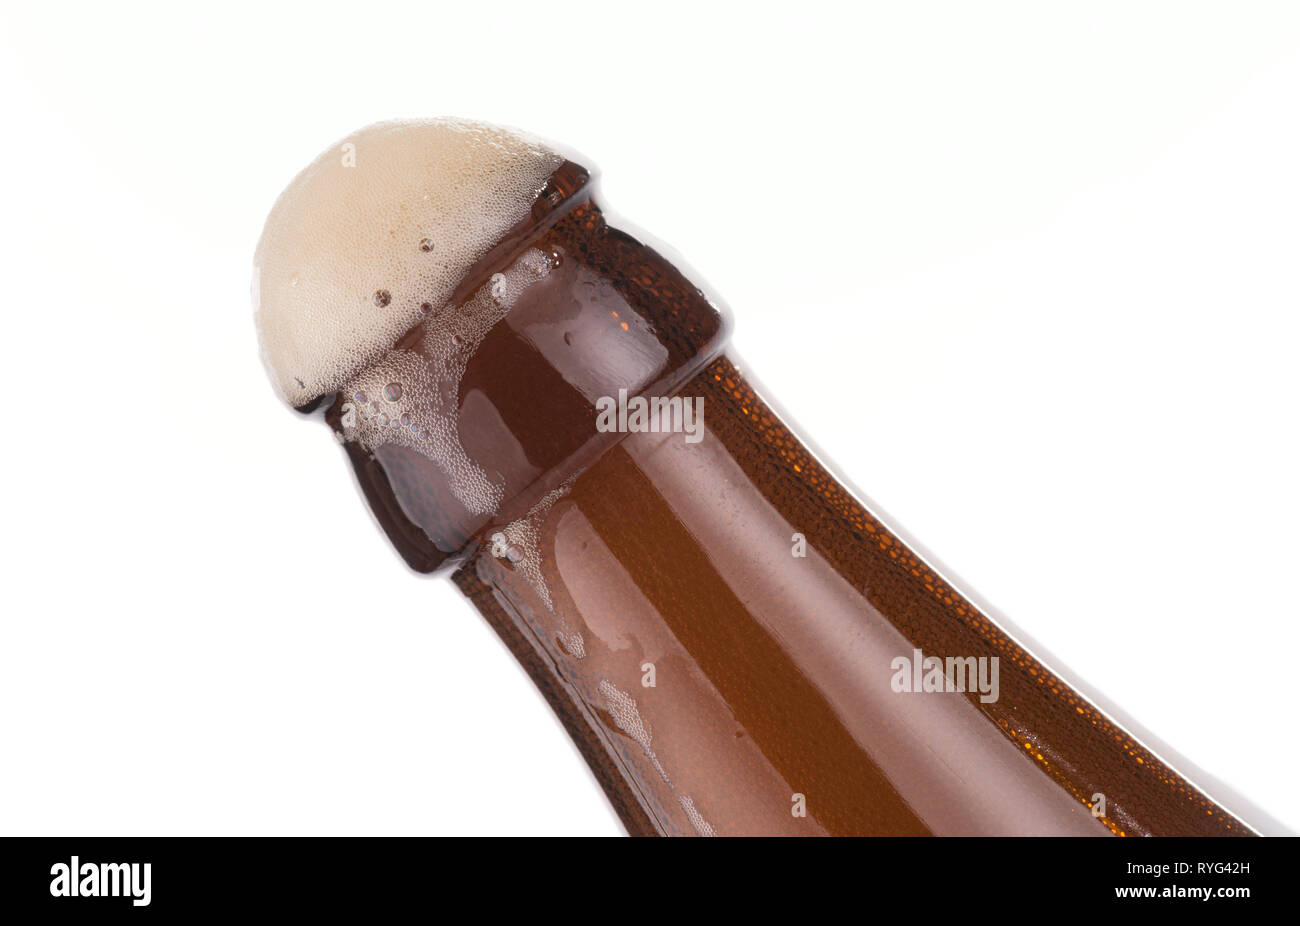 Open beer bottle with froth, isolated on white Stock Photo